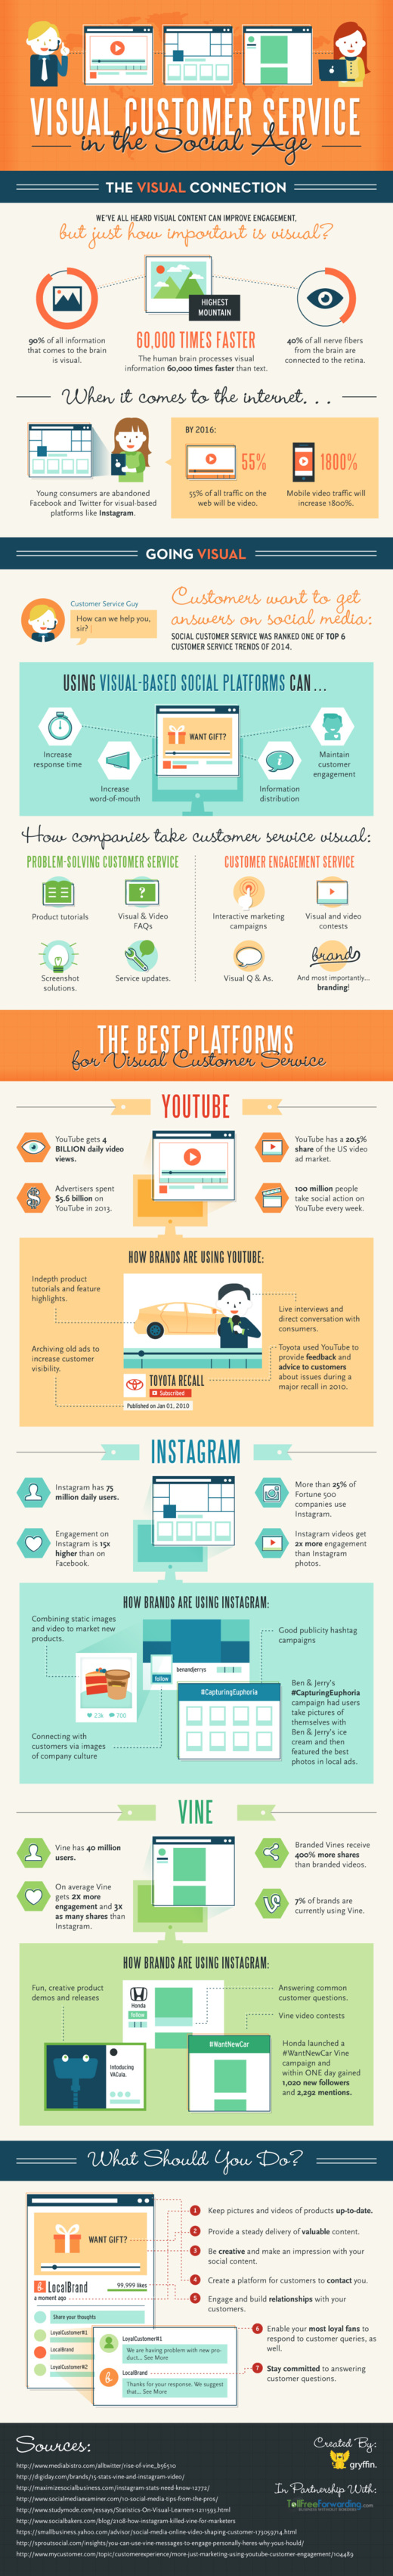 Visual Customer Service in the Social Age infographic